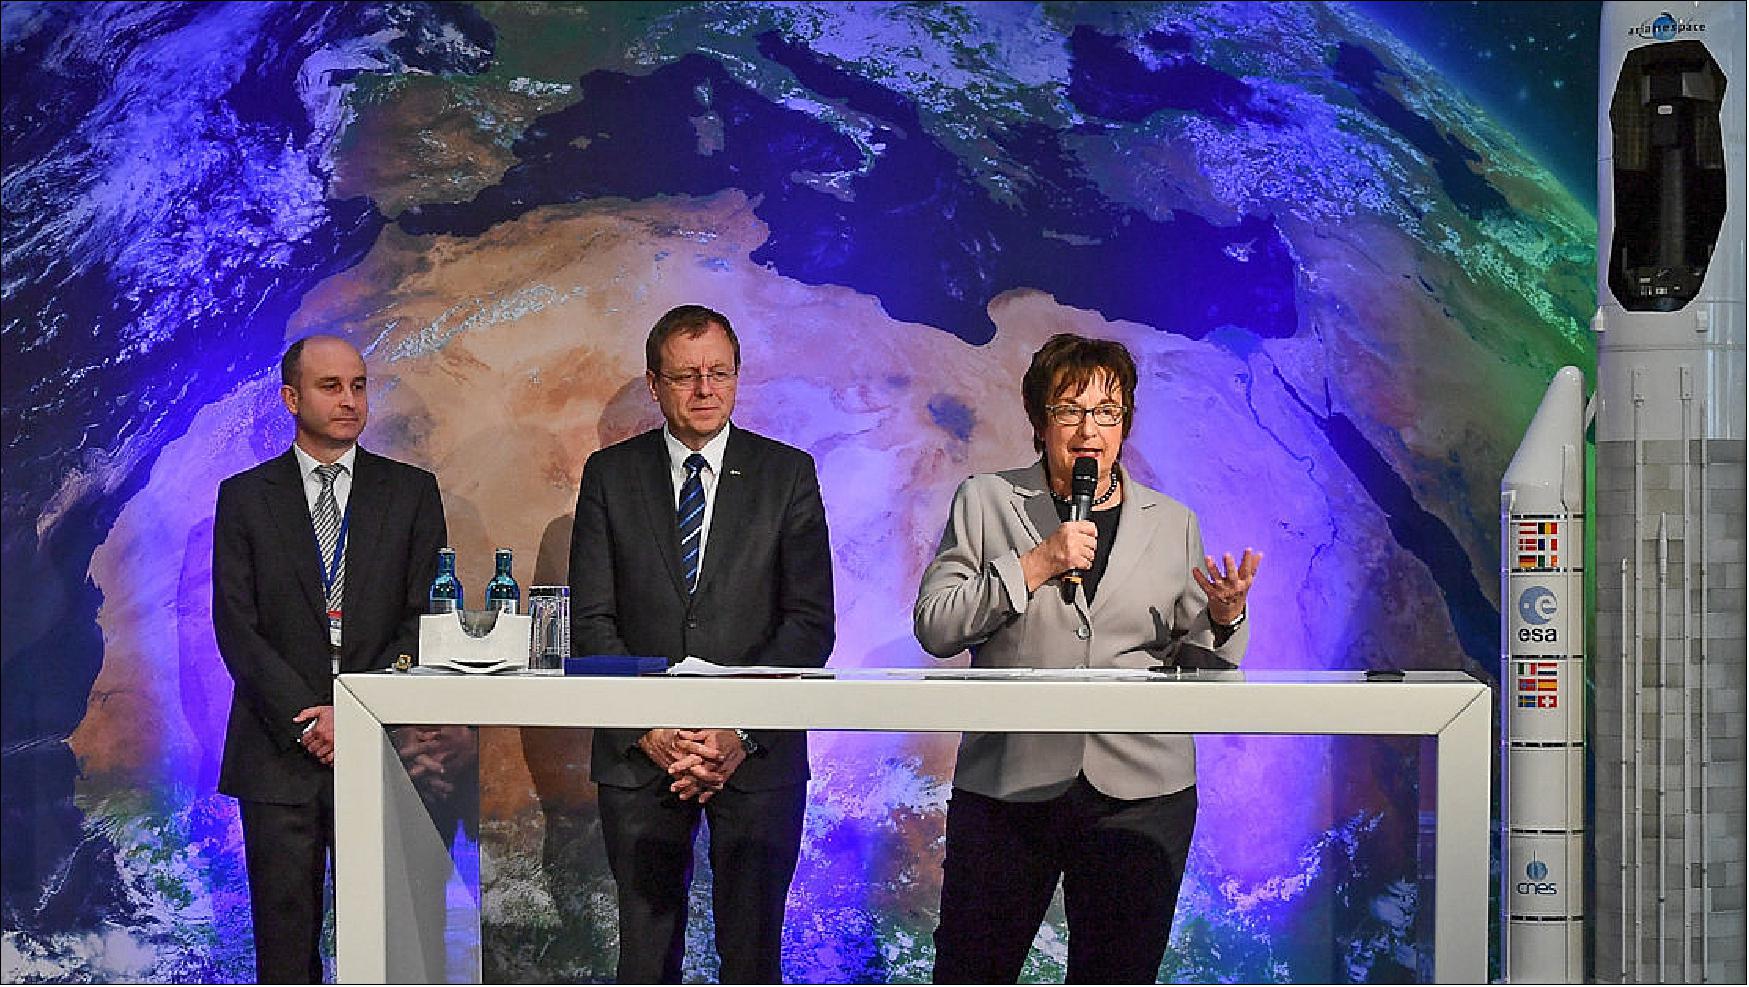 Figure 55: Decision-makers on stage at the media briefing following the 7th European Conference on Space Debris at ESA/ESOC. From left to right: Head of ESA’s Space Debris Office, Holger Krag; ESA Director General Jan Woerner; and German Federal Minister for Economic Affairs and Energy, Brigitte Zypries (image credit: ESA)